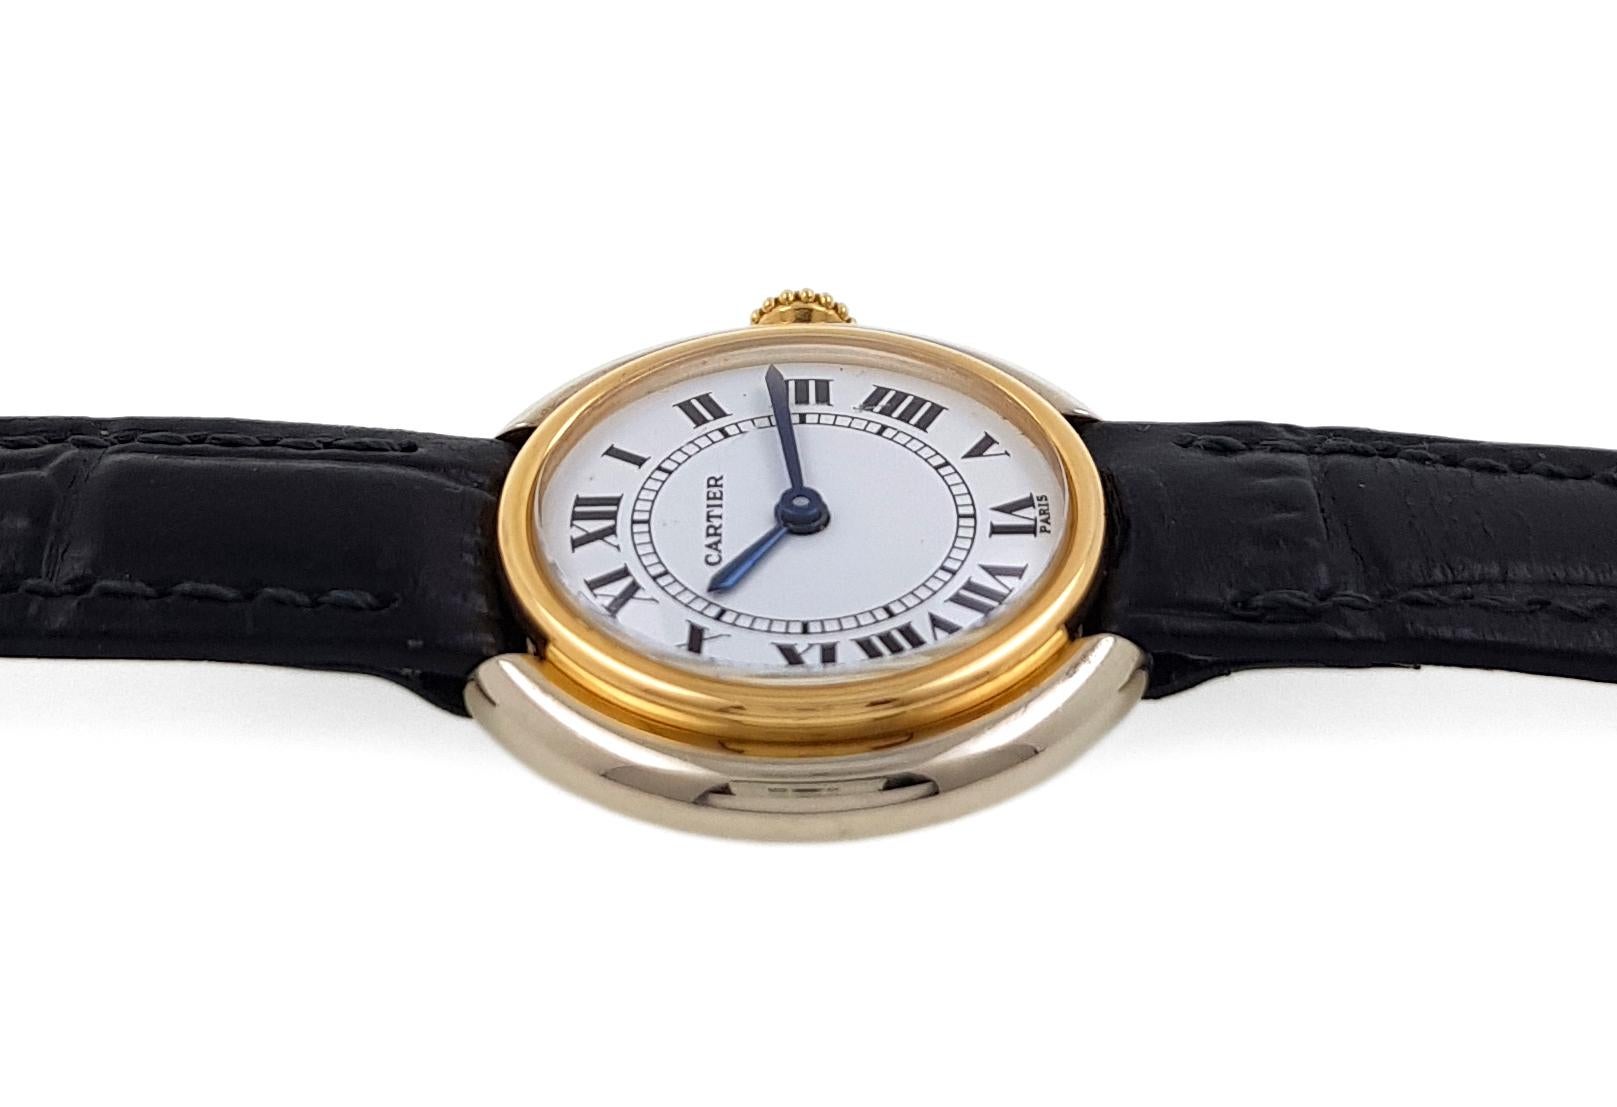 Cartier Vendome Ellipse Gondole Paris Dial 67113 from 1977 18k Yellow White Gold In Excellent Condition For Sale In Neuilly-sur-Seine, IDF